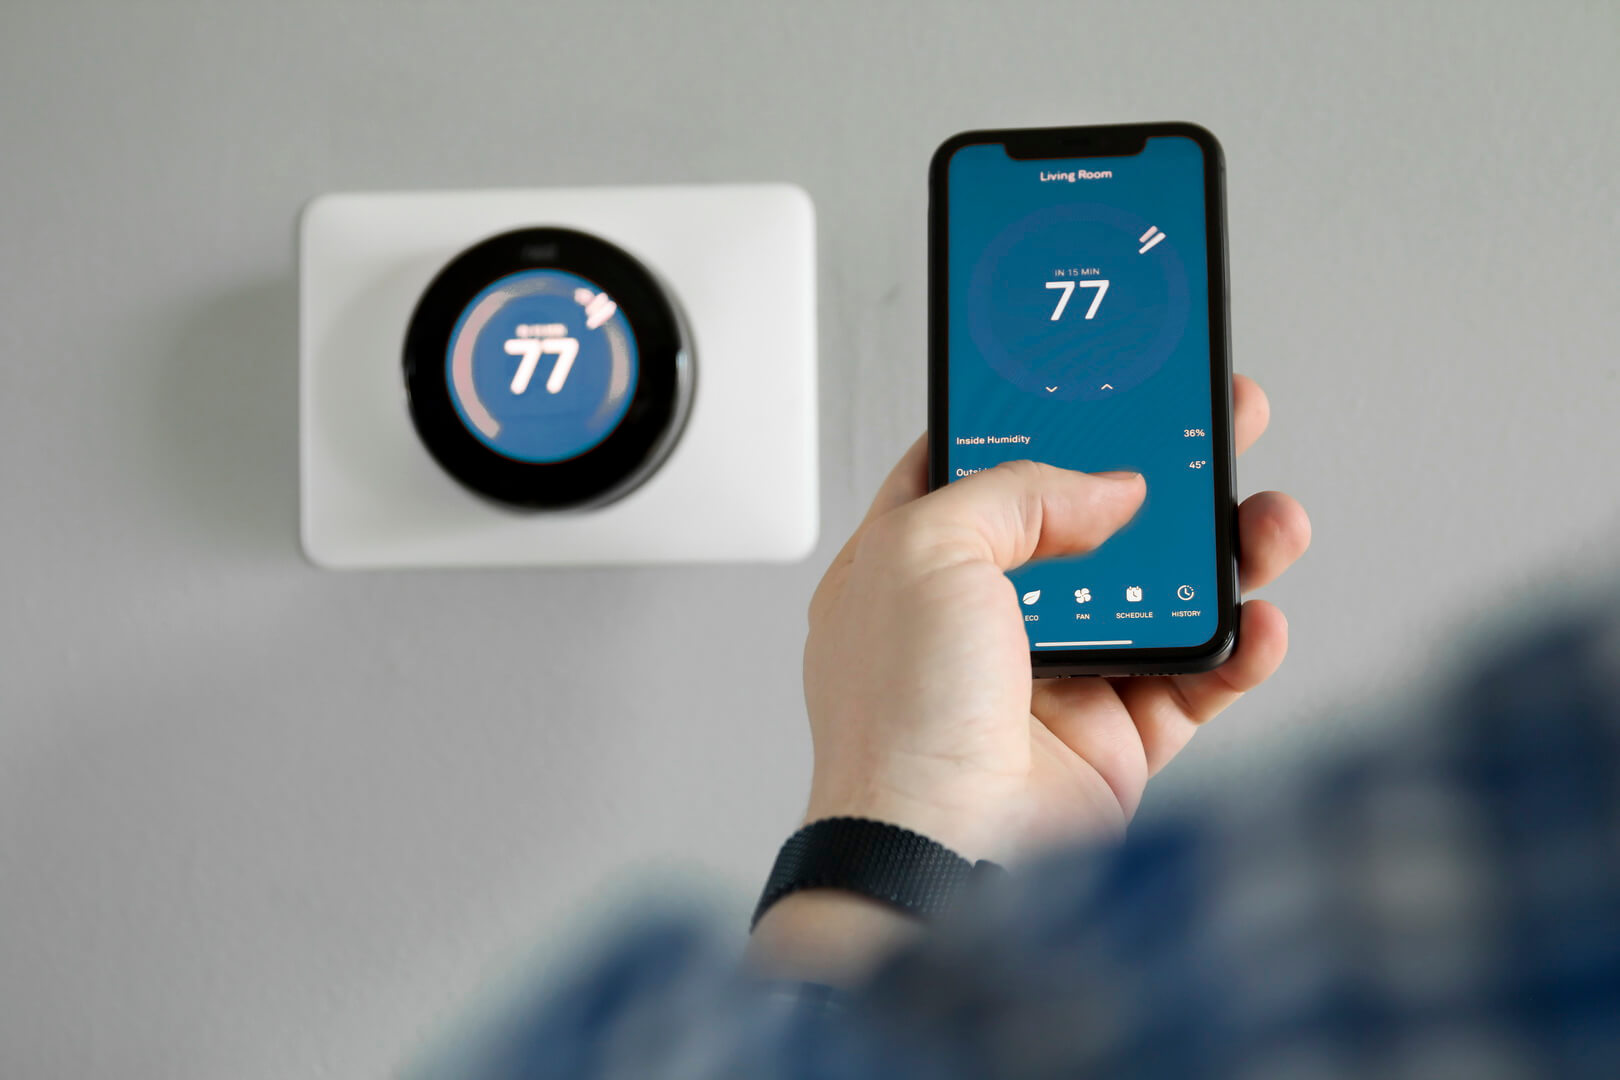 You Will Be Able To Control Your Smart Thermostat Remotely